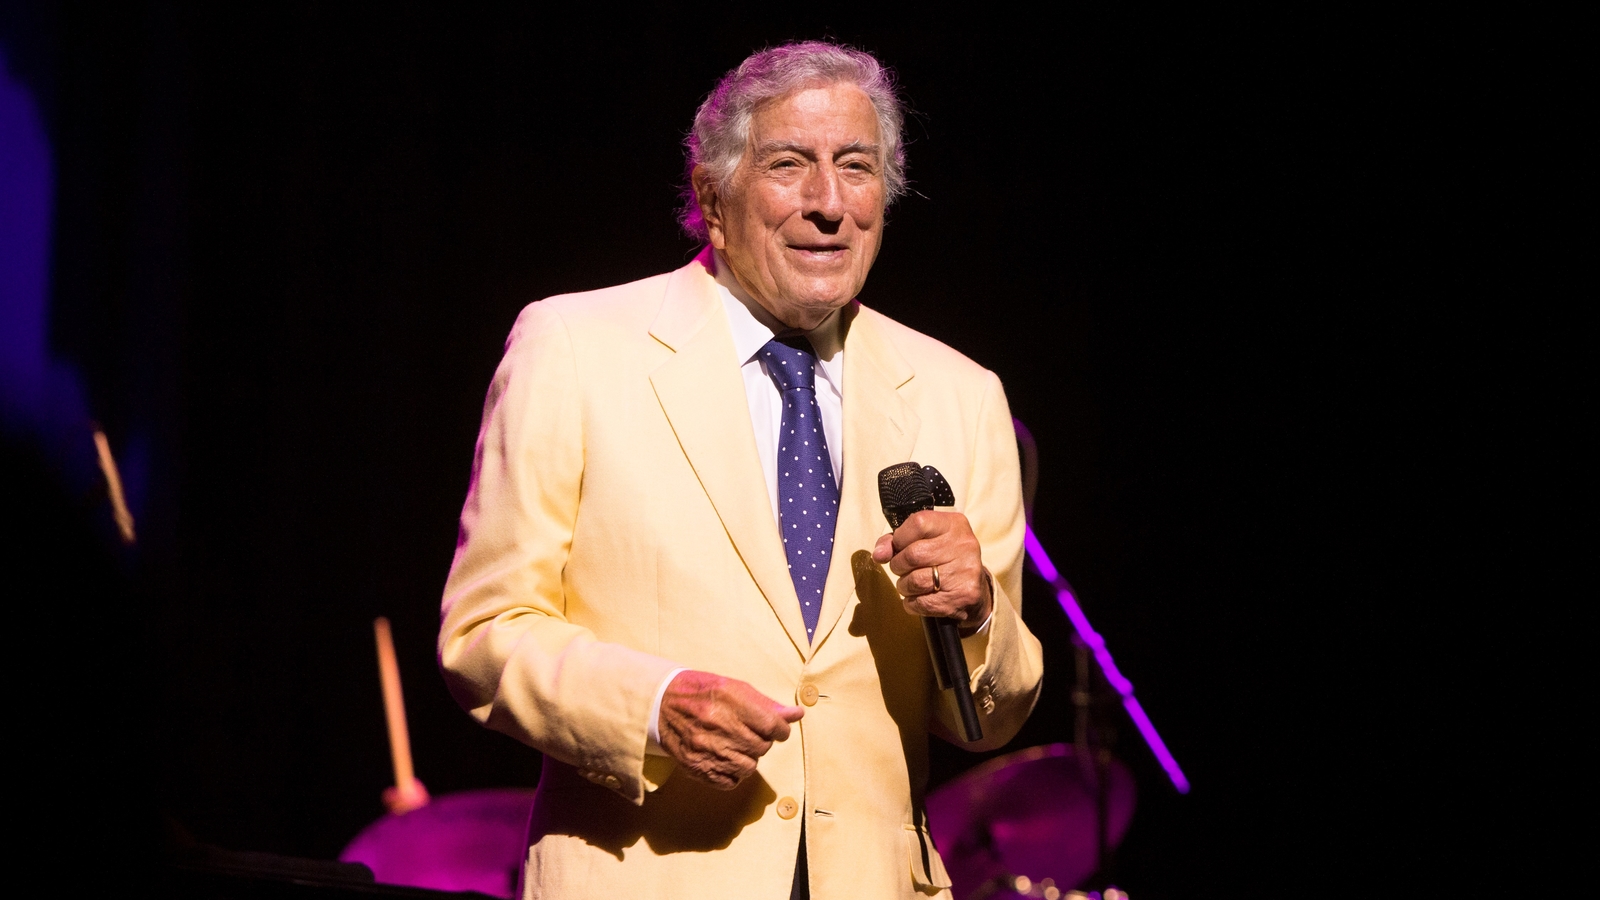 Tony Bennett Death Masterful Singer Known For I Left My Heart In San Francisco Dies At 96 6483